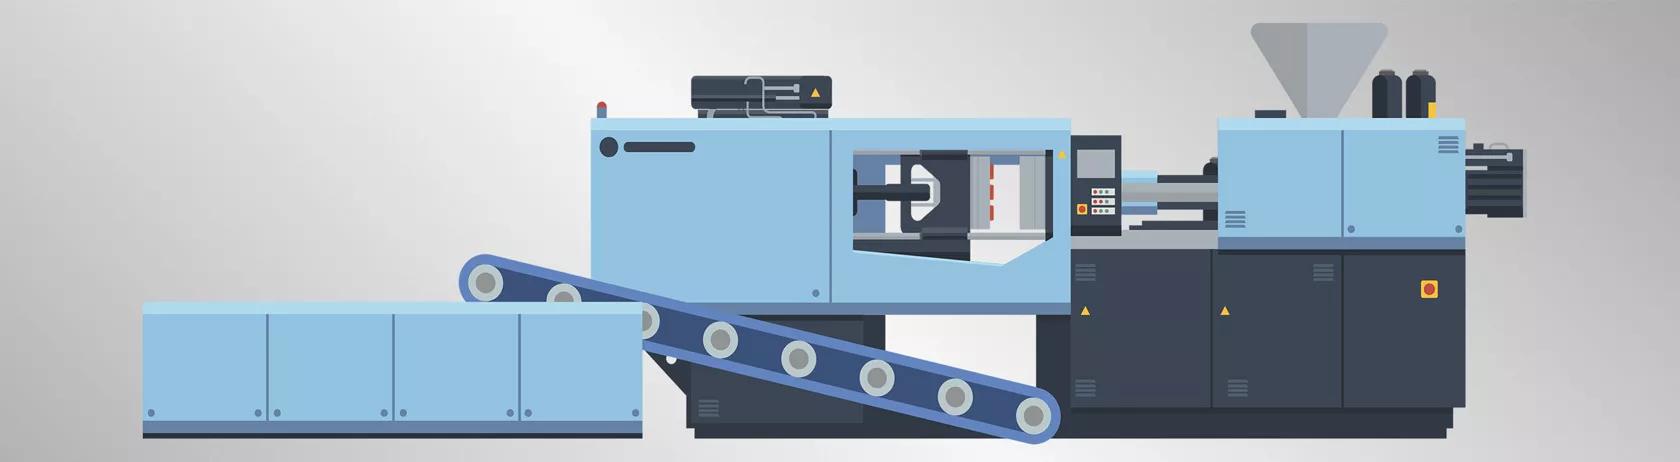 The injection moulding process is complex